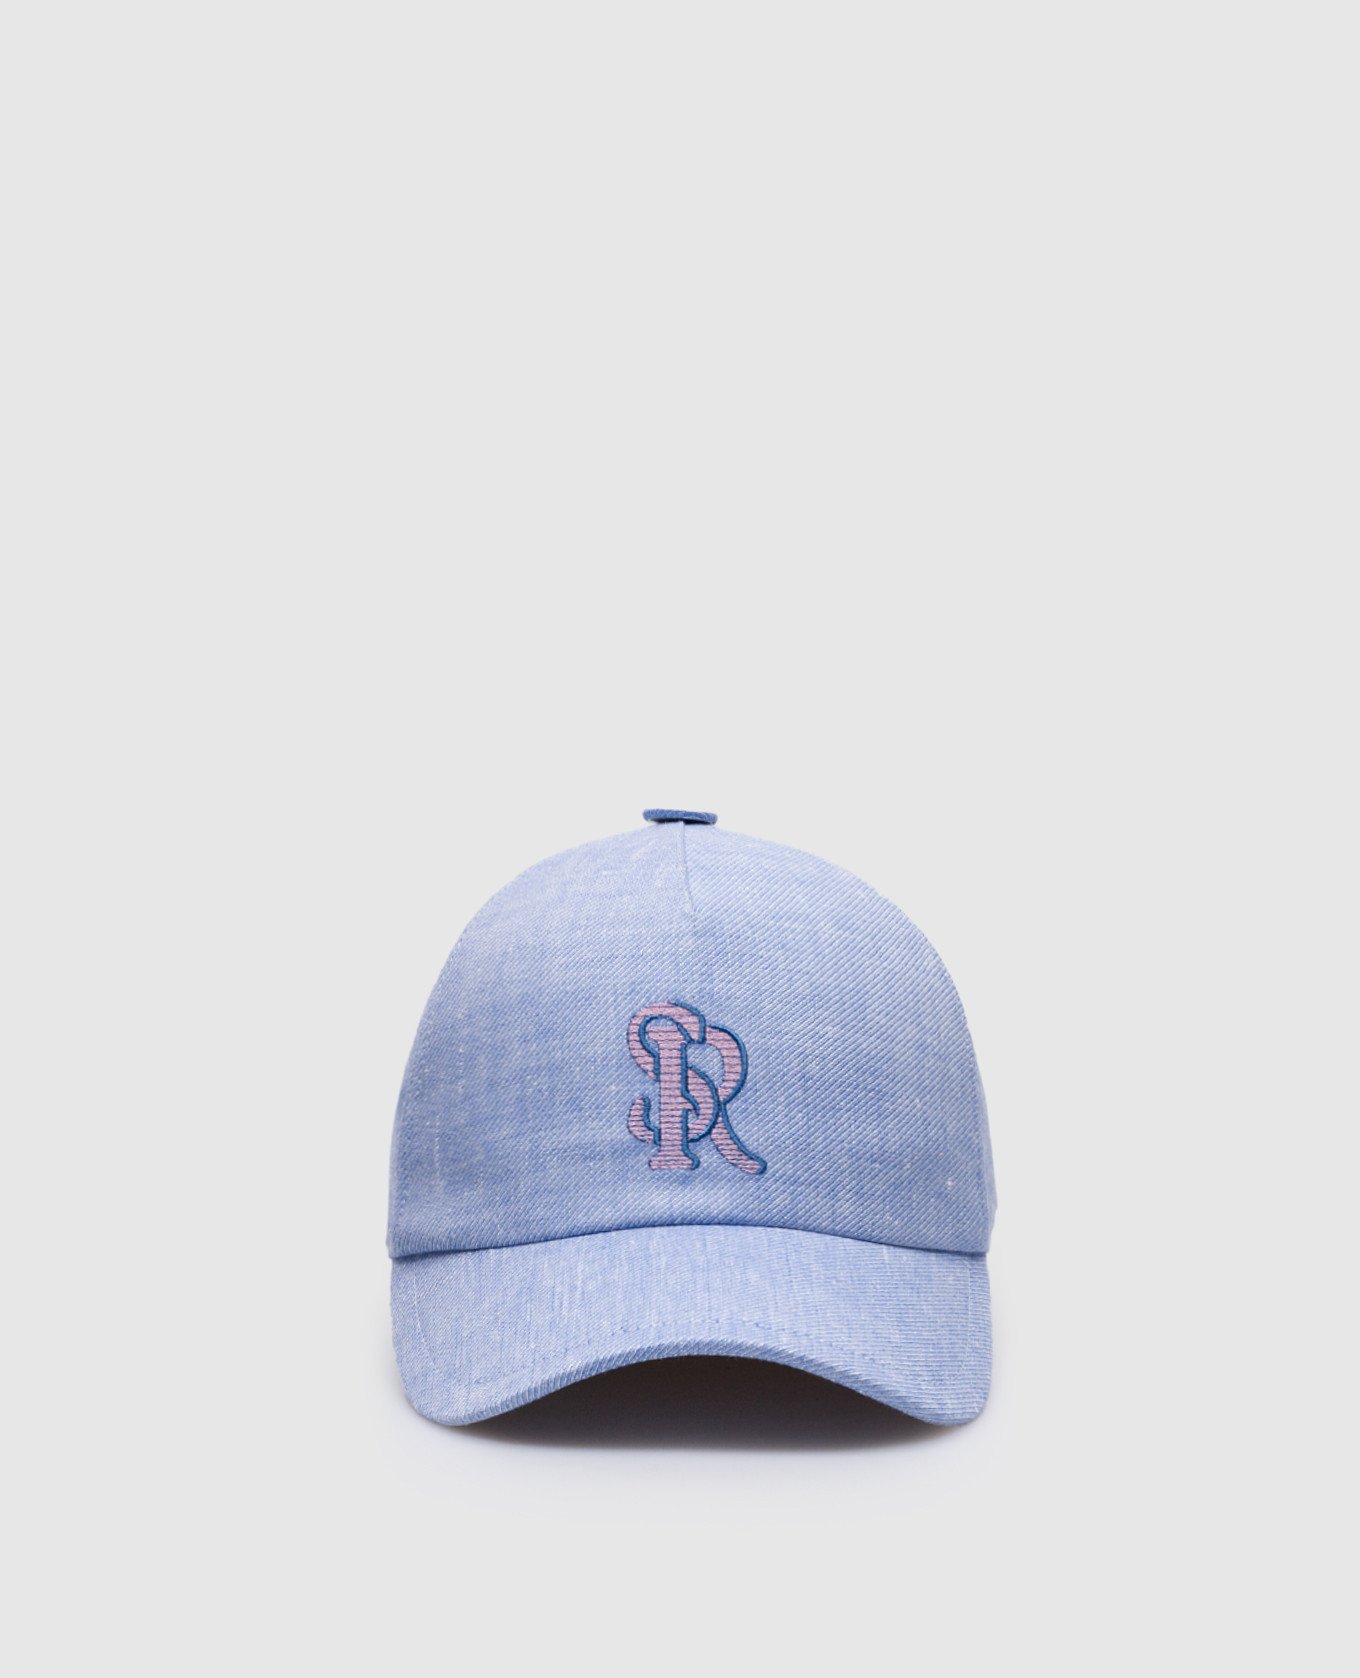 Blue cap in wool and silk with logo monogram embroidery